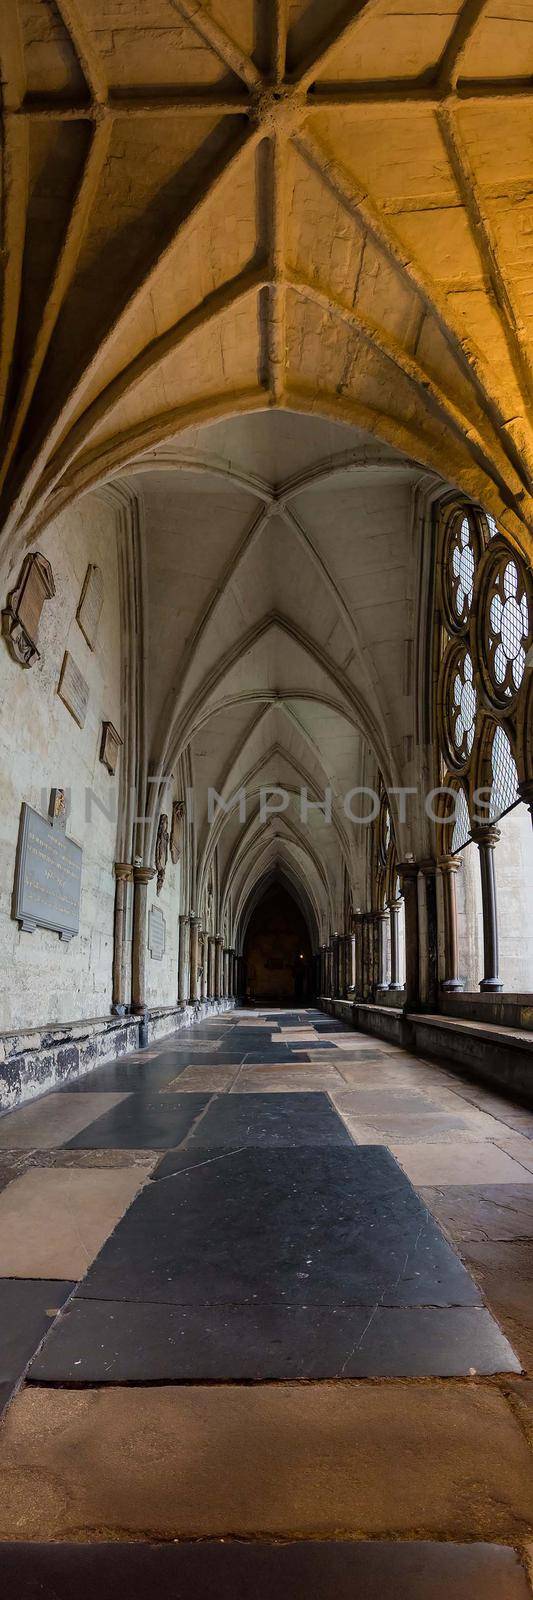 Medieval church arches in London, UK by jyurinko